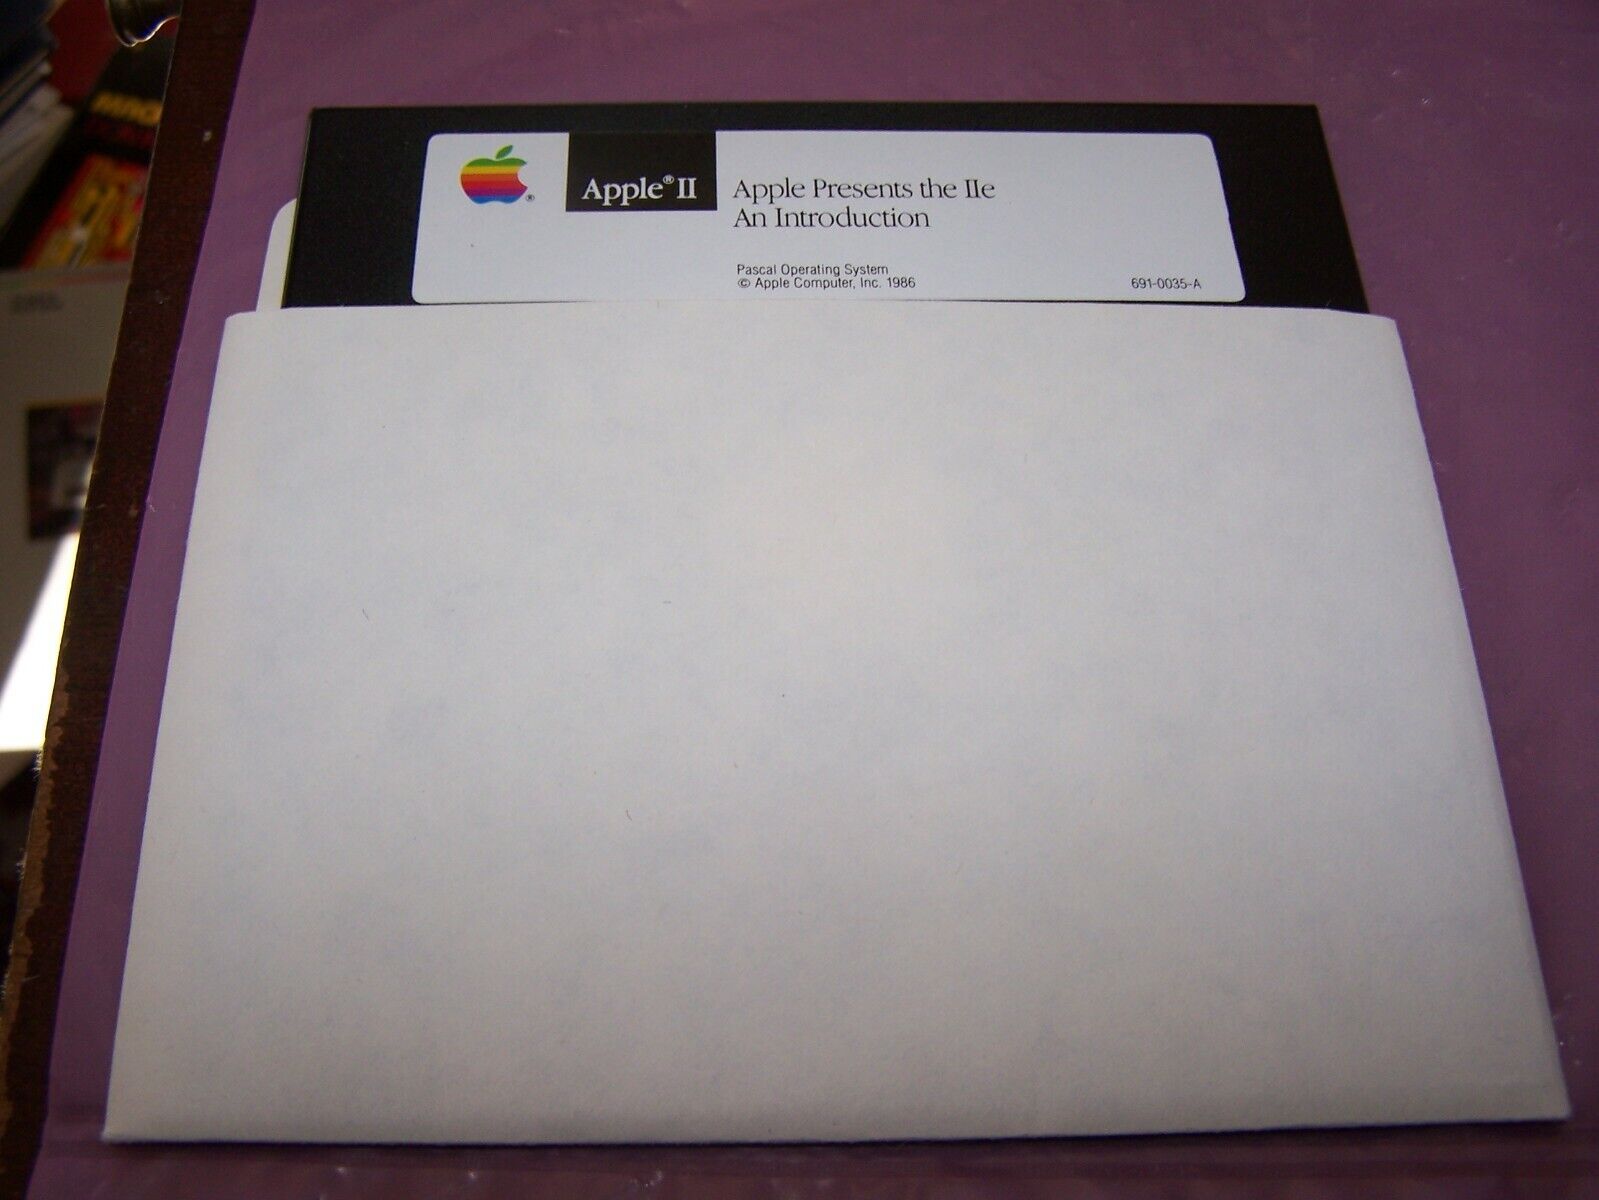 Apple II Apple Presents the IIe An Introduction 691-0035-A on 5.25 Disk